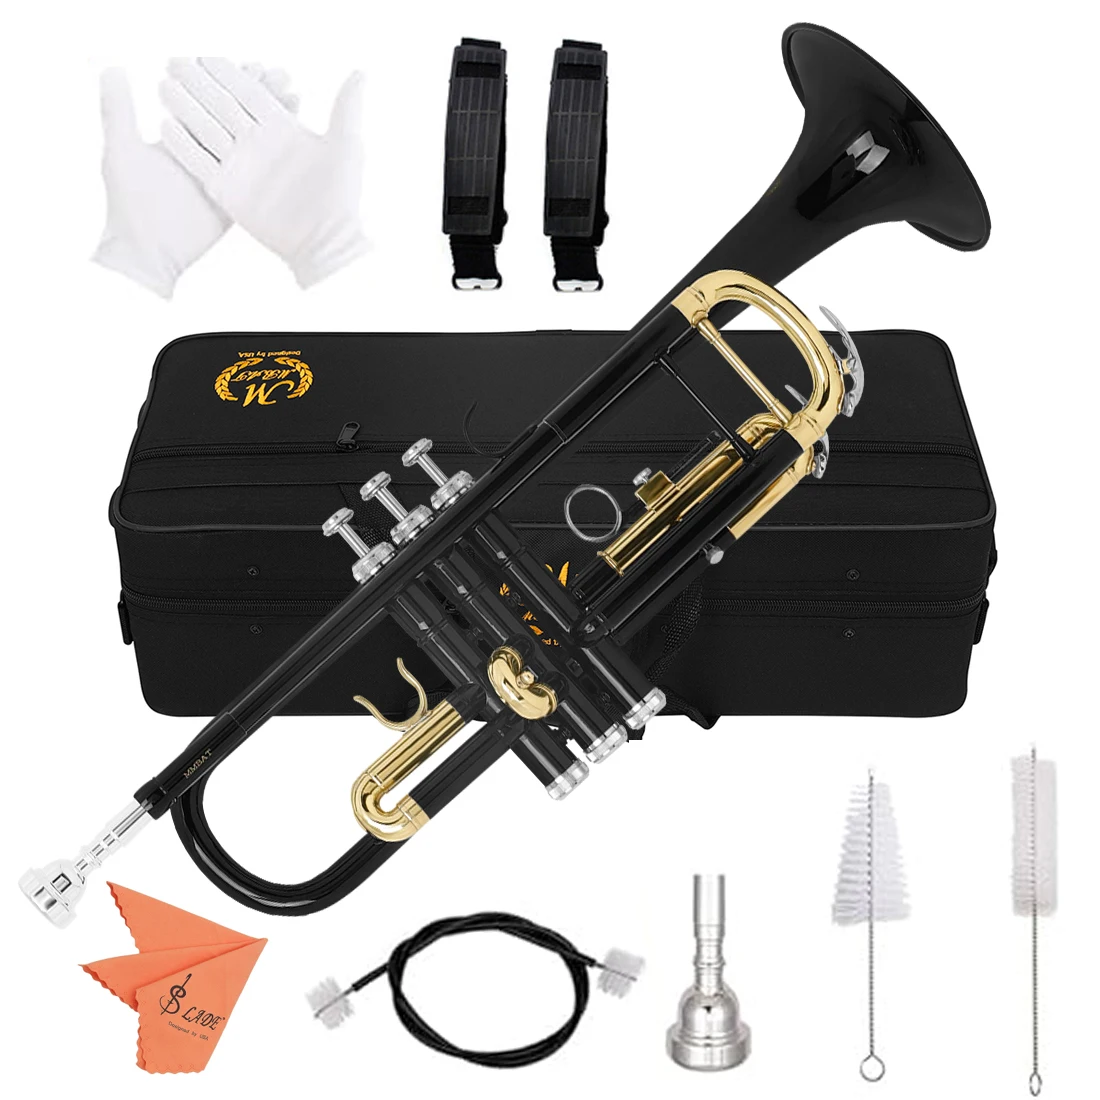 

Black Bb Standard Trumpet Set Brass Student Beginners Trumpet Instruments with Box 7C Blowing Nozzle Gloves Cleaning Kit